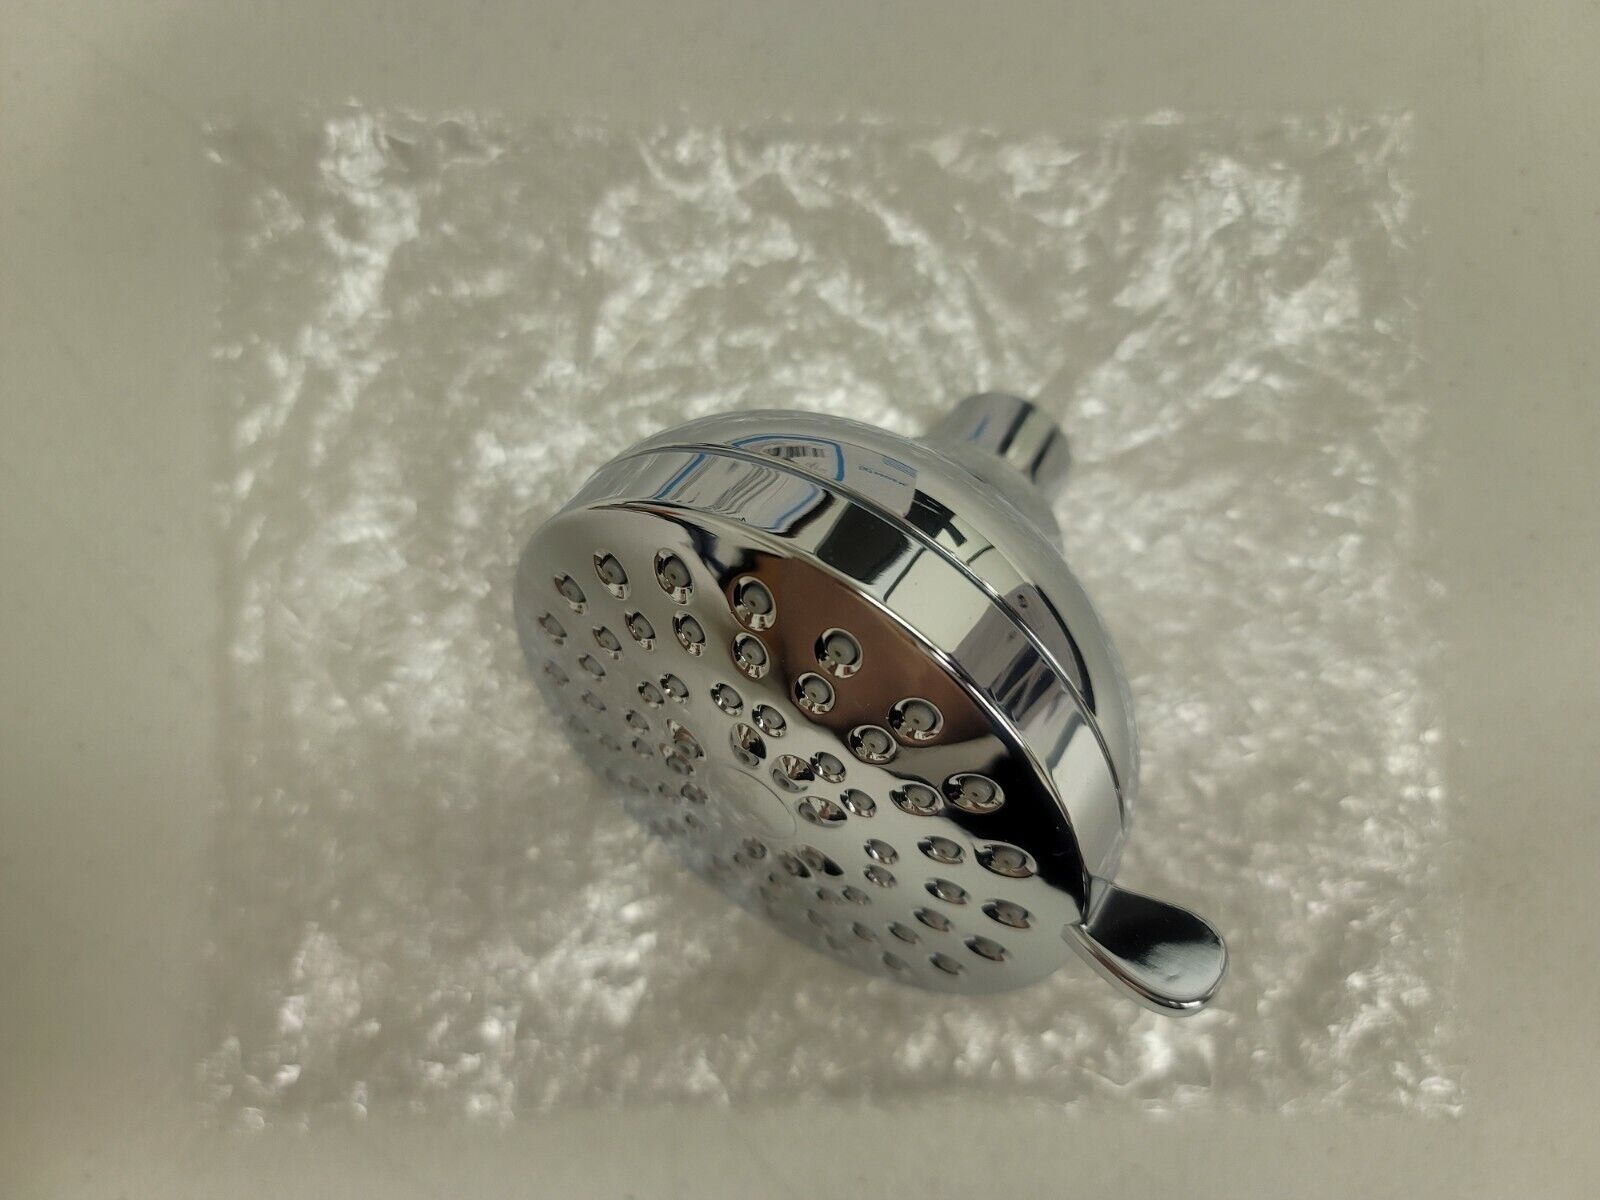 How Many Gallons Per Minute Is The Moen Adler Showerhead